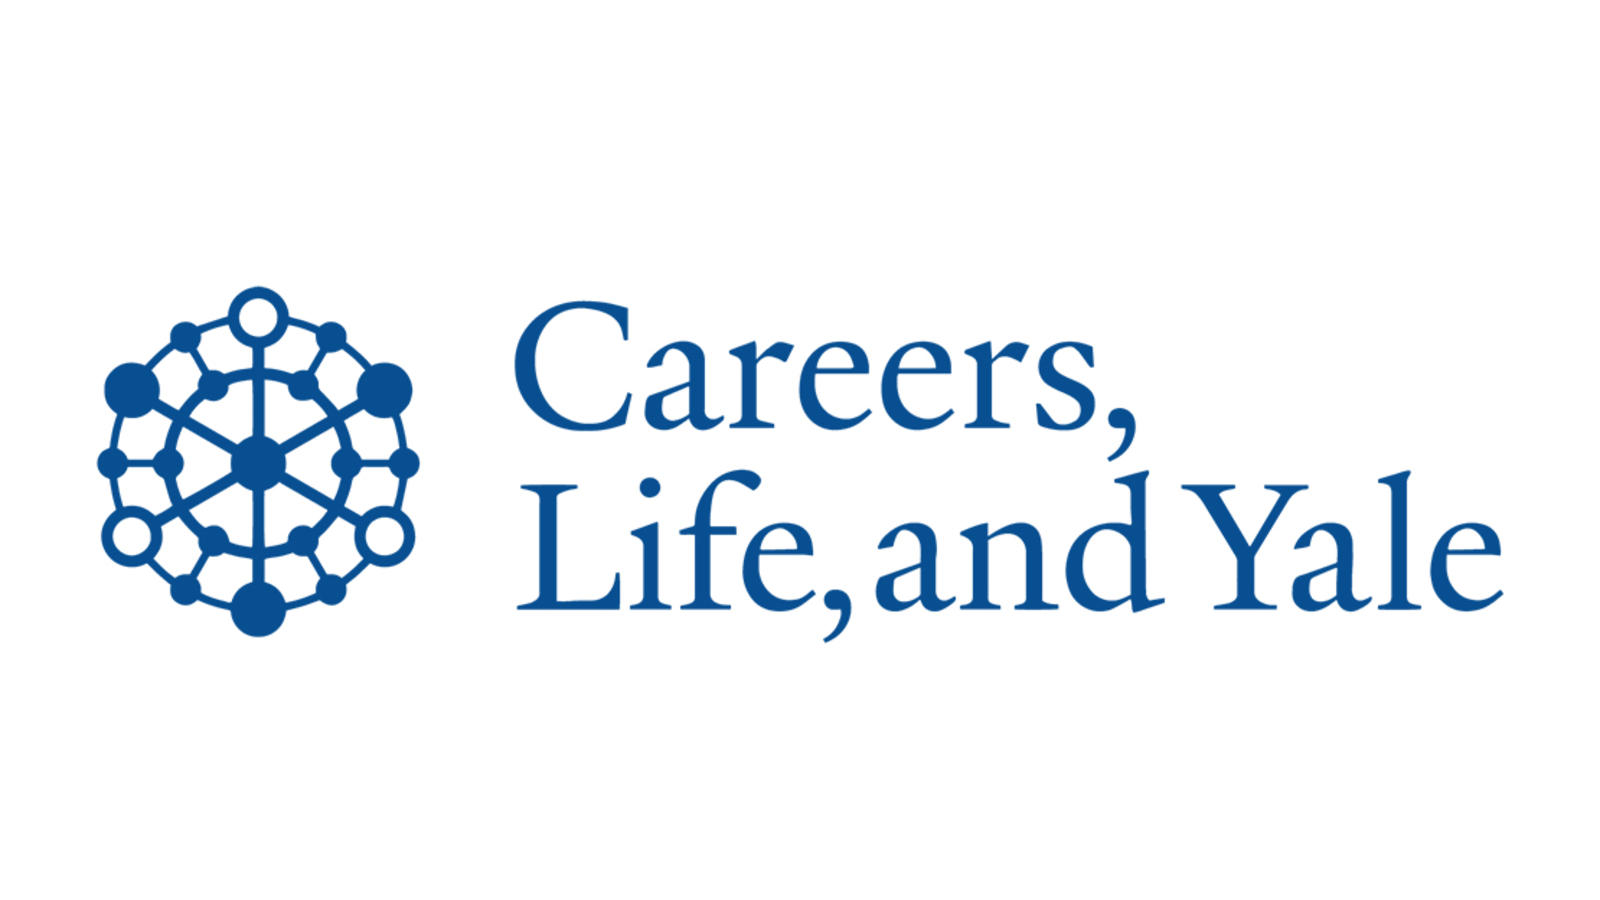 Careers, Life and Yale